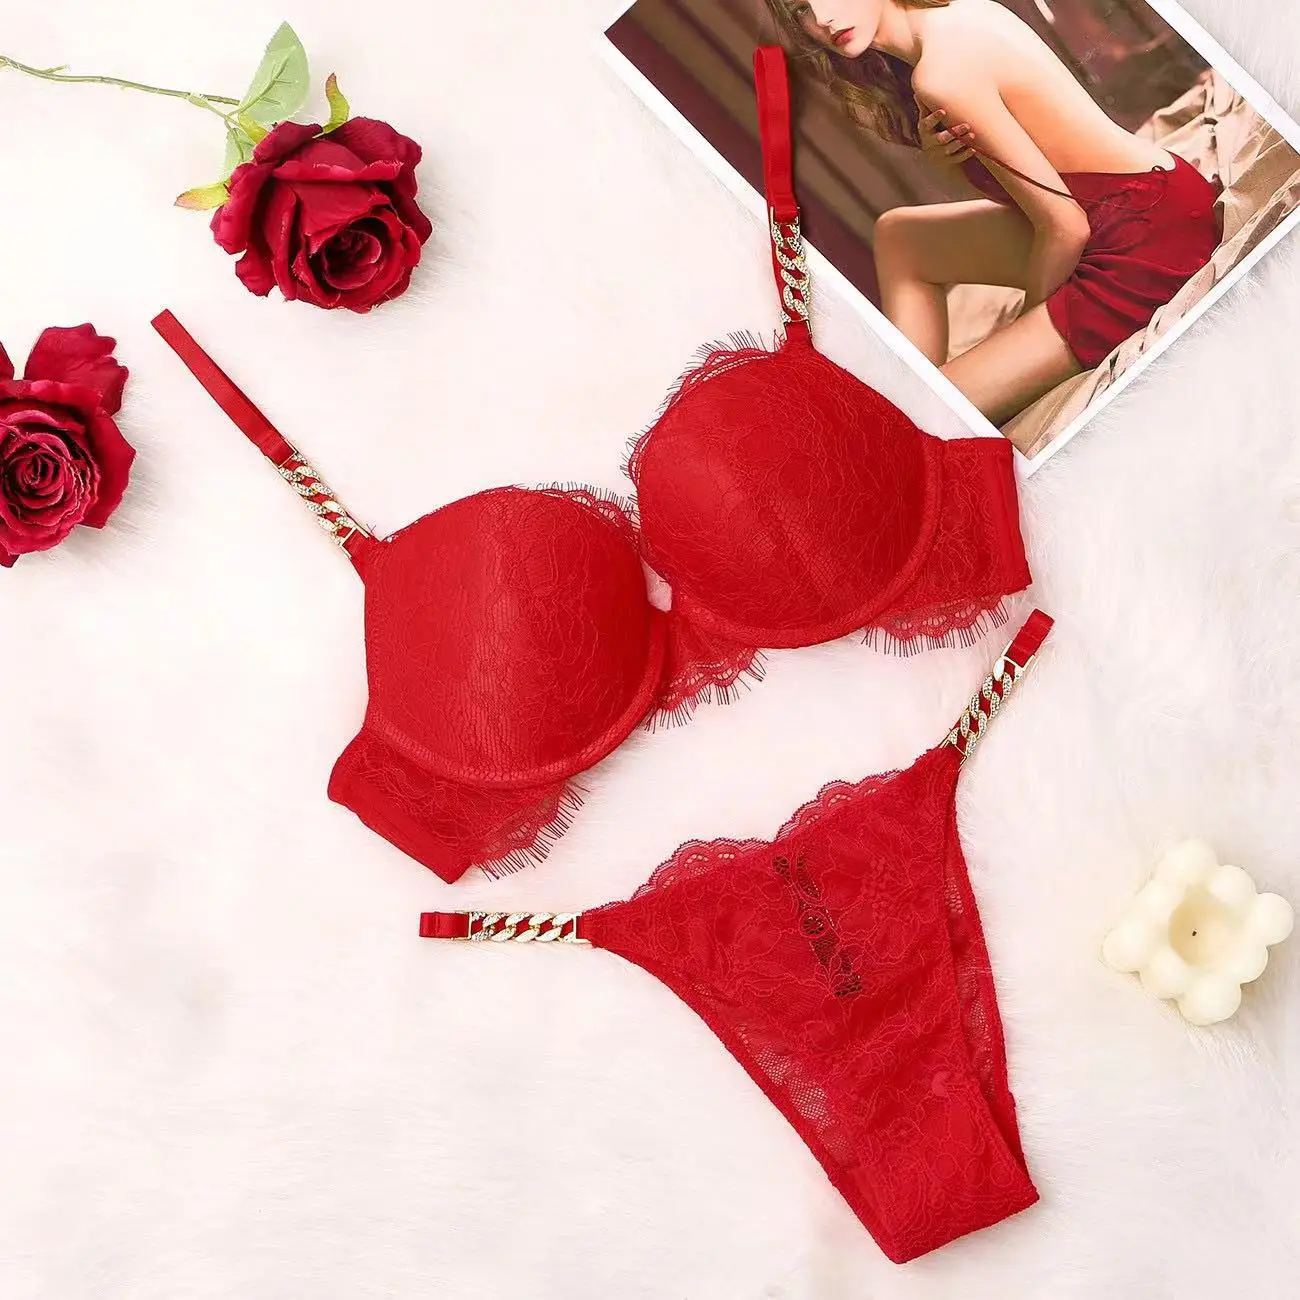 How to choose lingerie: Comfort vs Style